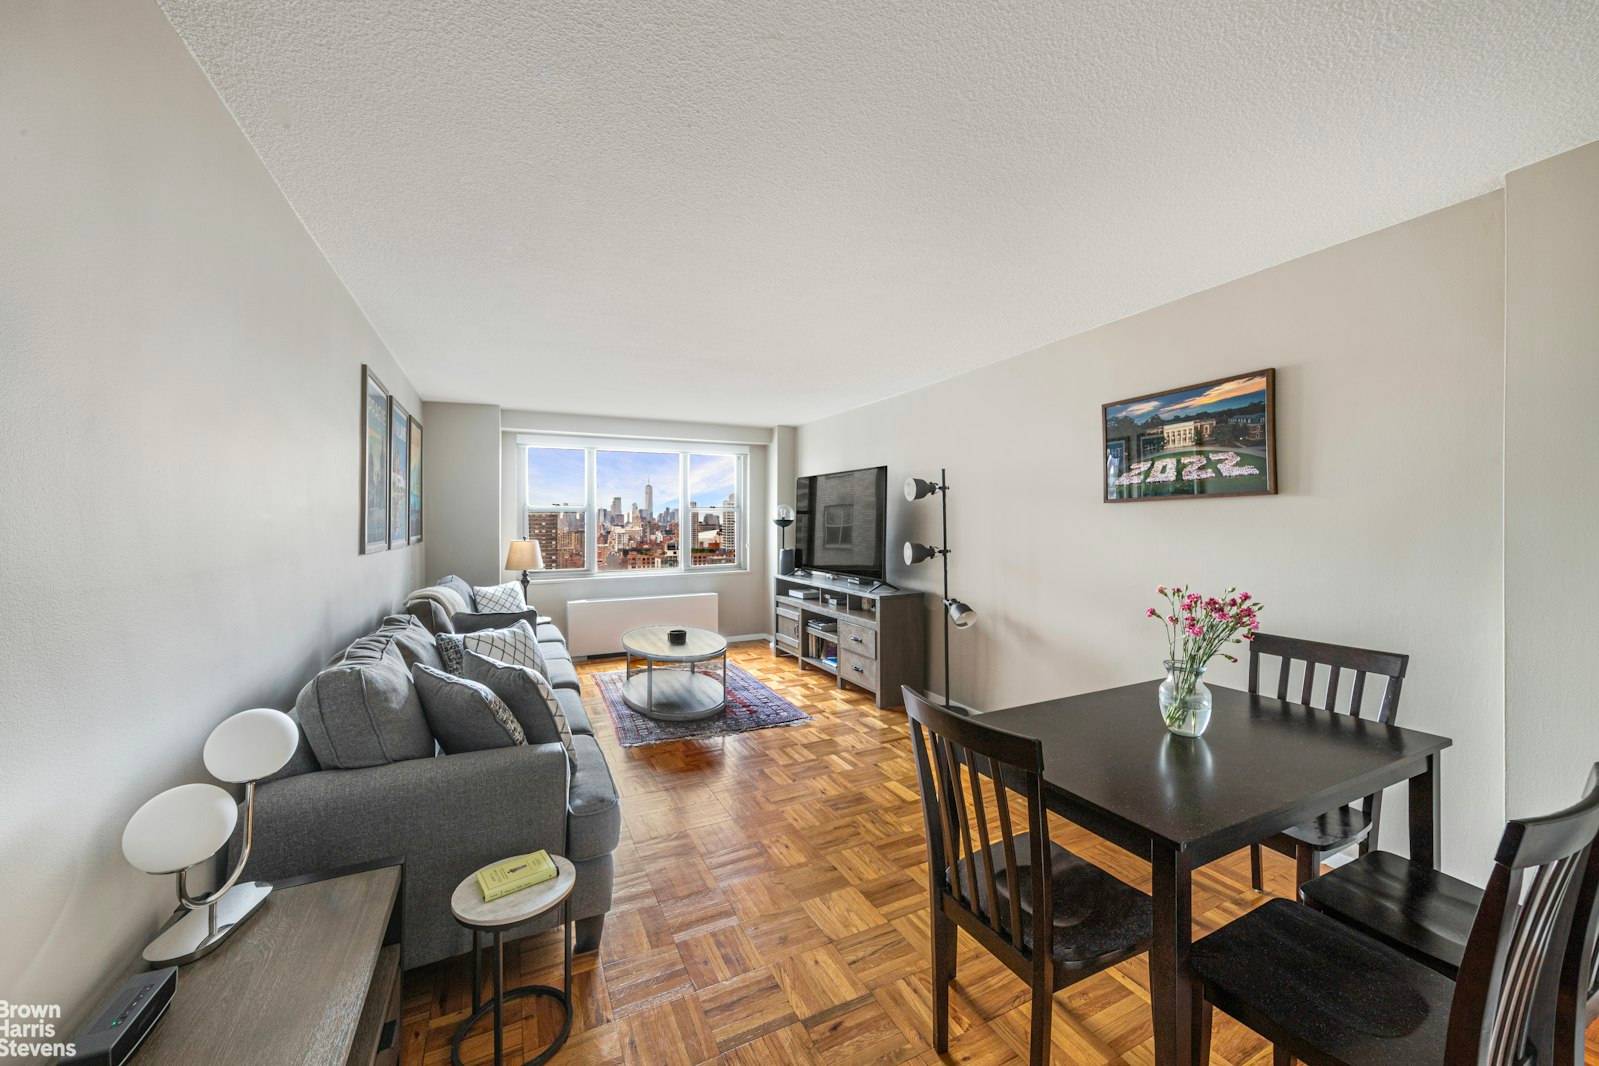 VIEWS VIEWS VIEWS ! Majestic South city views from this apartment highlight a wonderful opportunity at the Churchill, a full service condominium in the true heart of midtown.